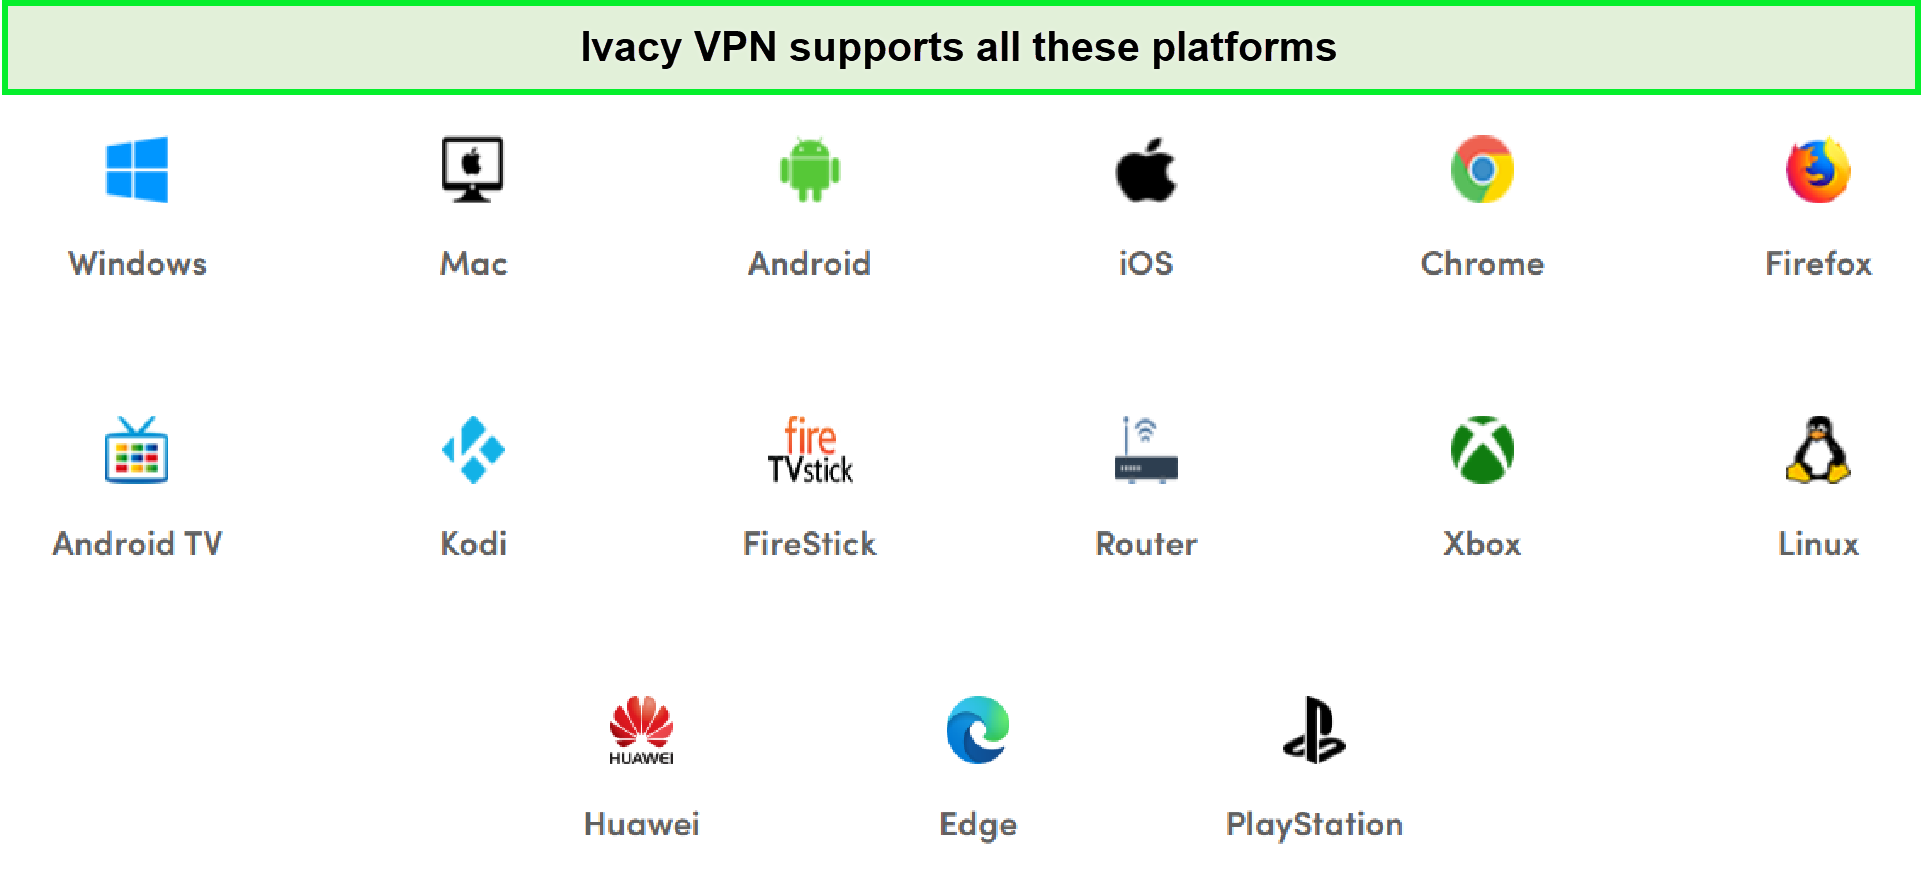 ivacy-device-compatibility-in-Netherlands